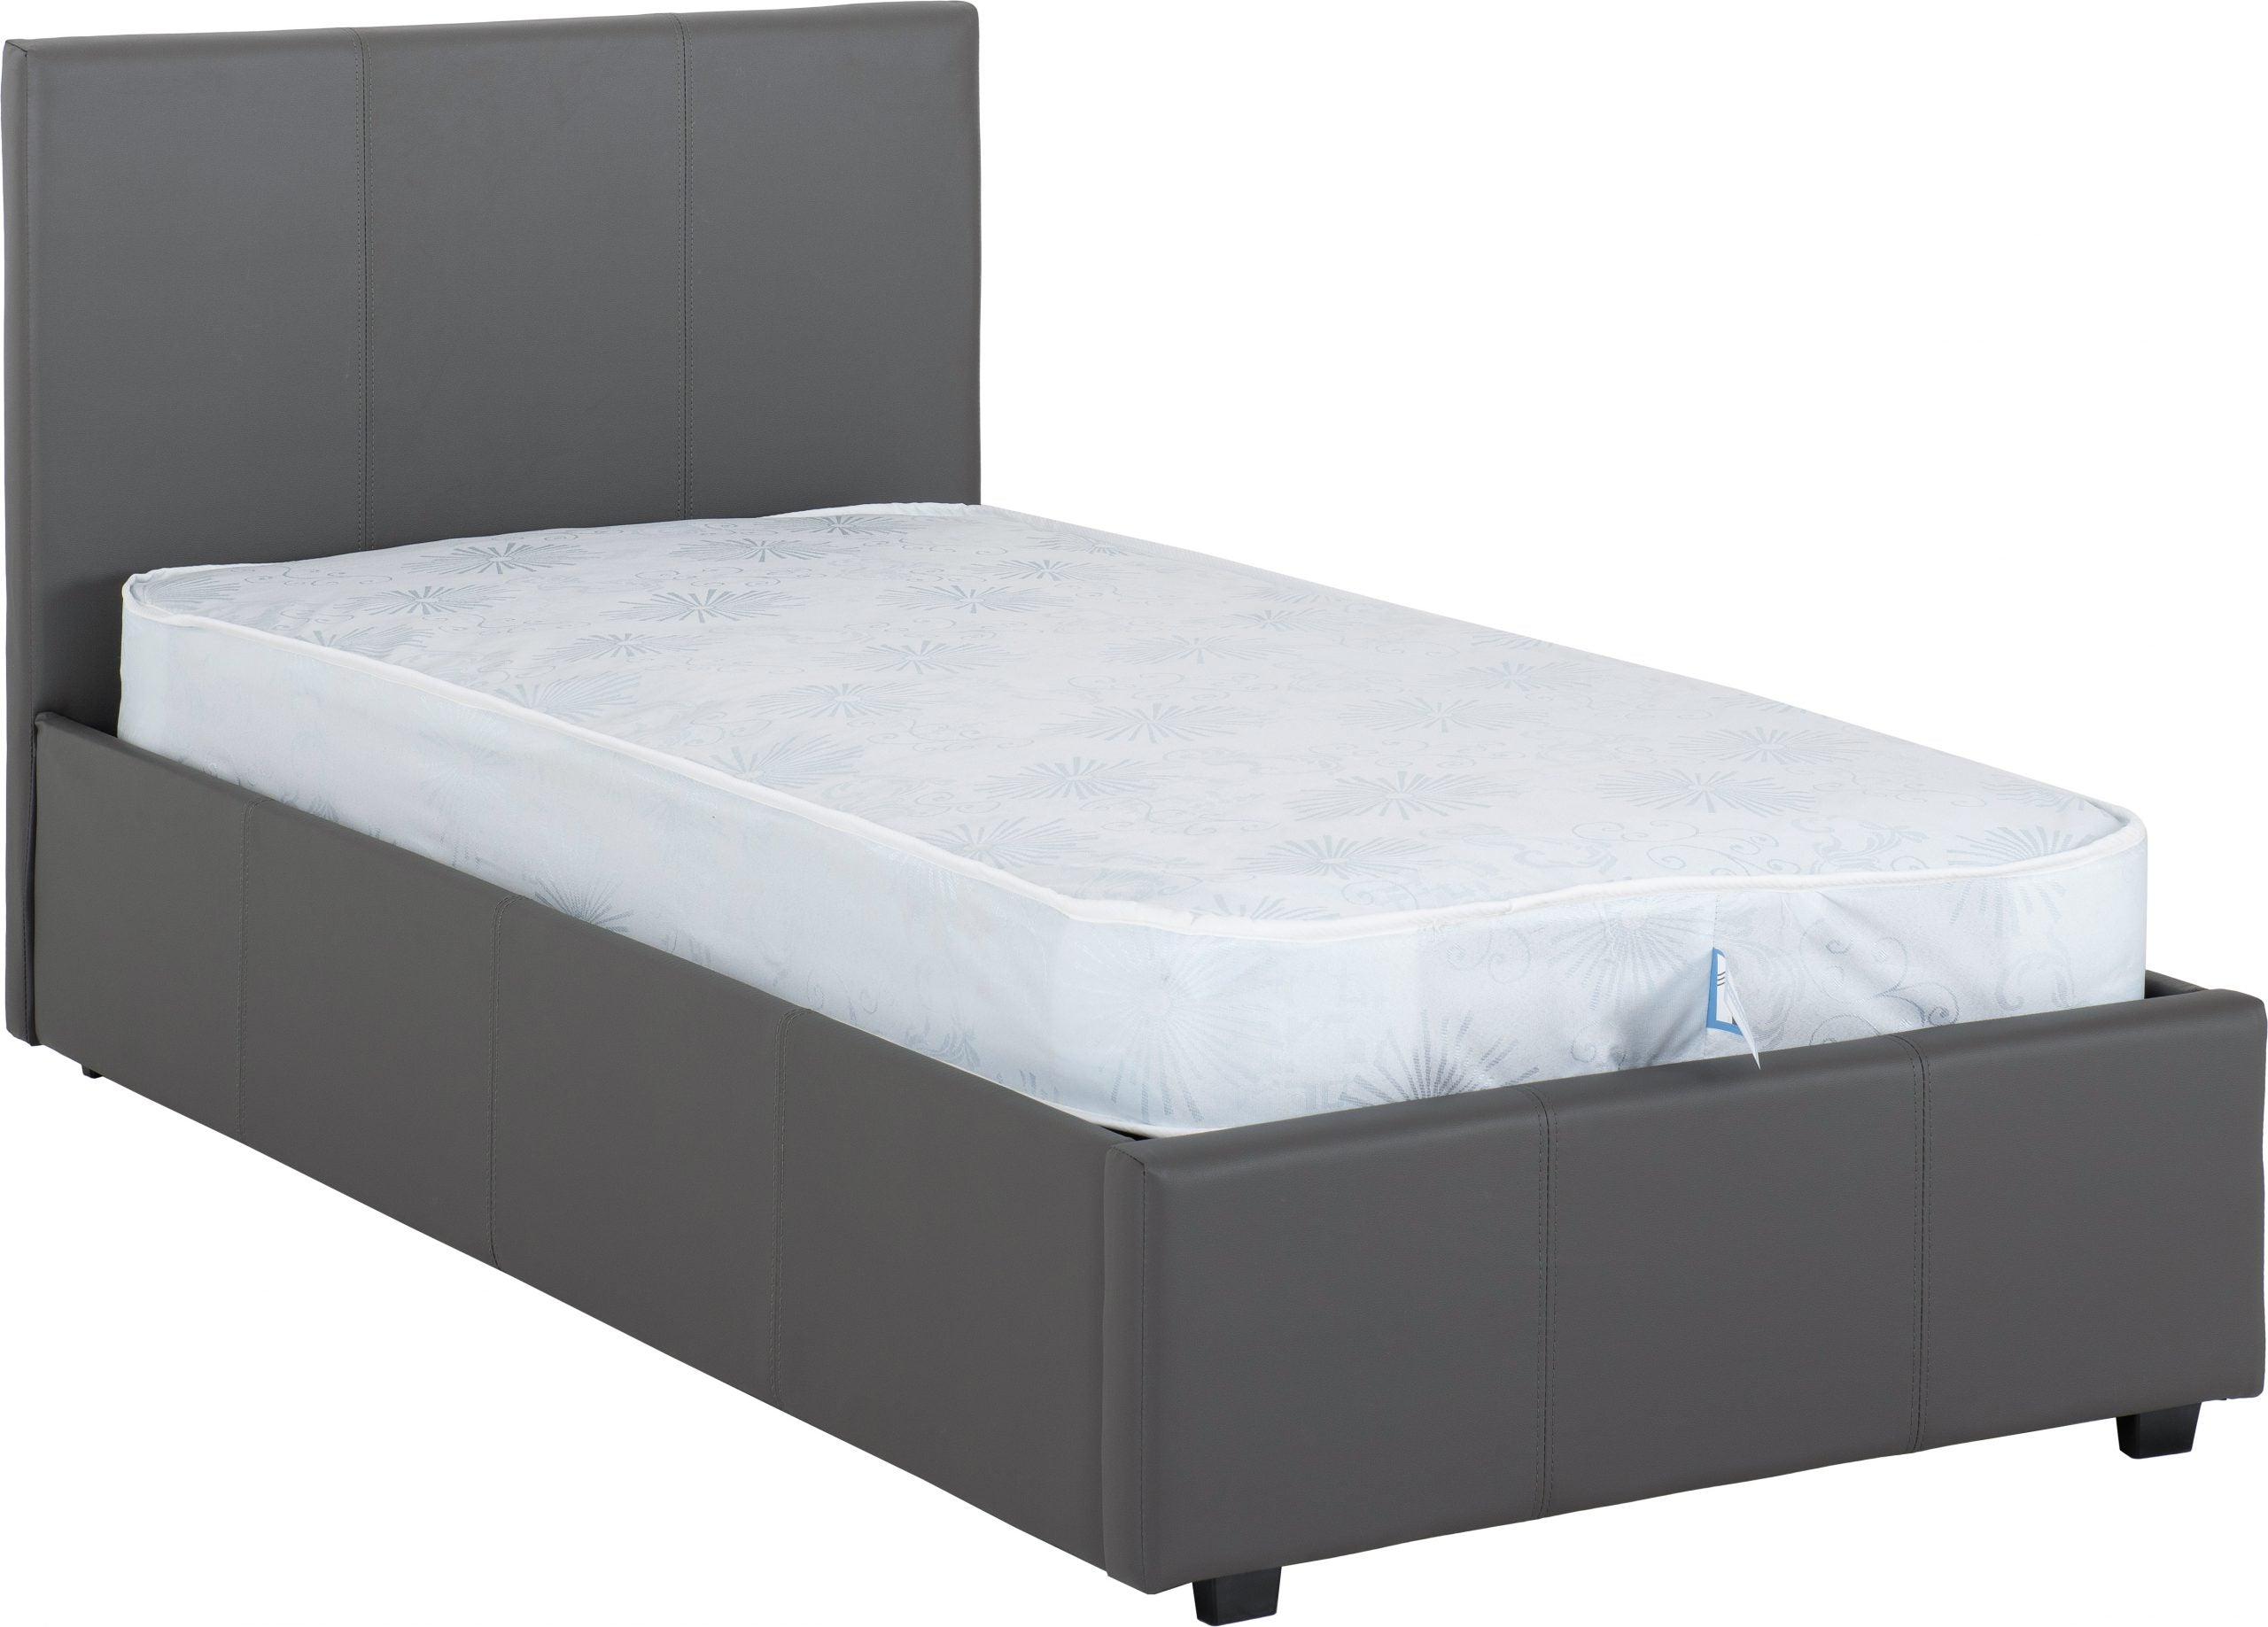 grey faux leather bed